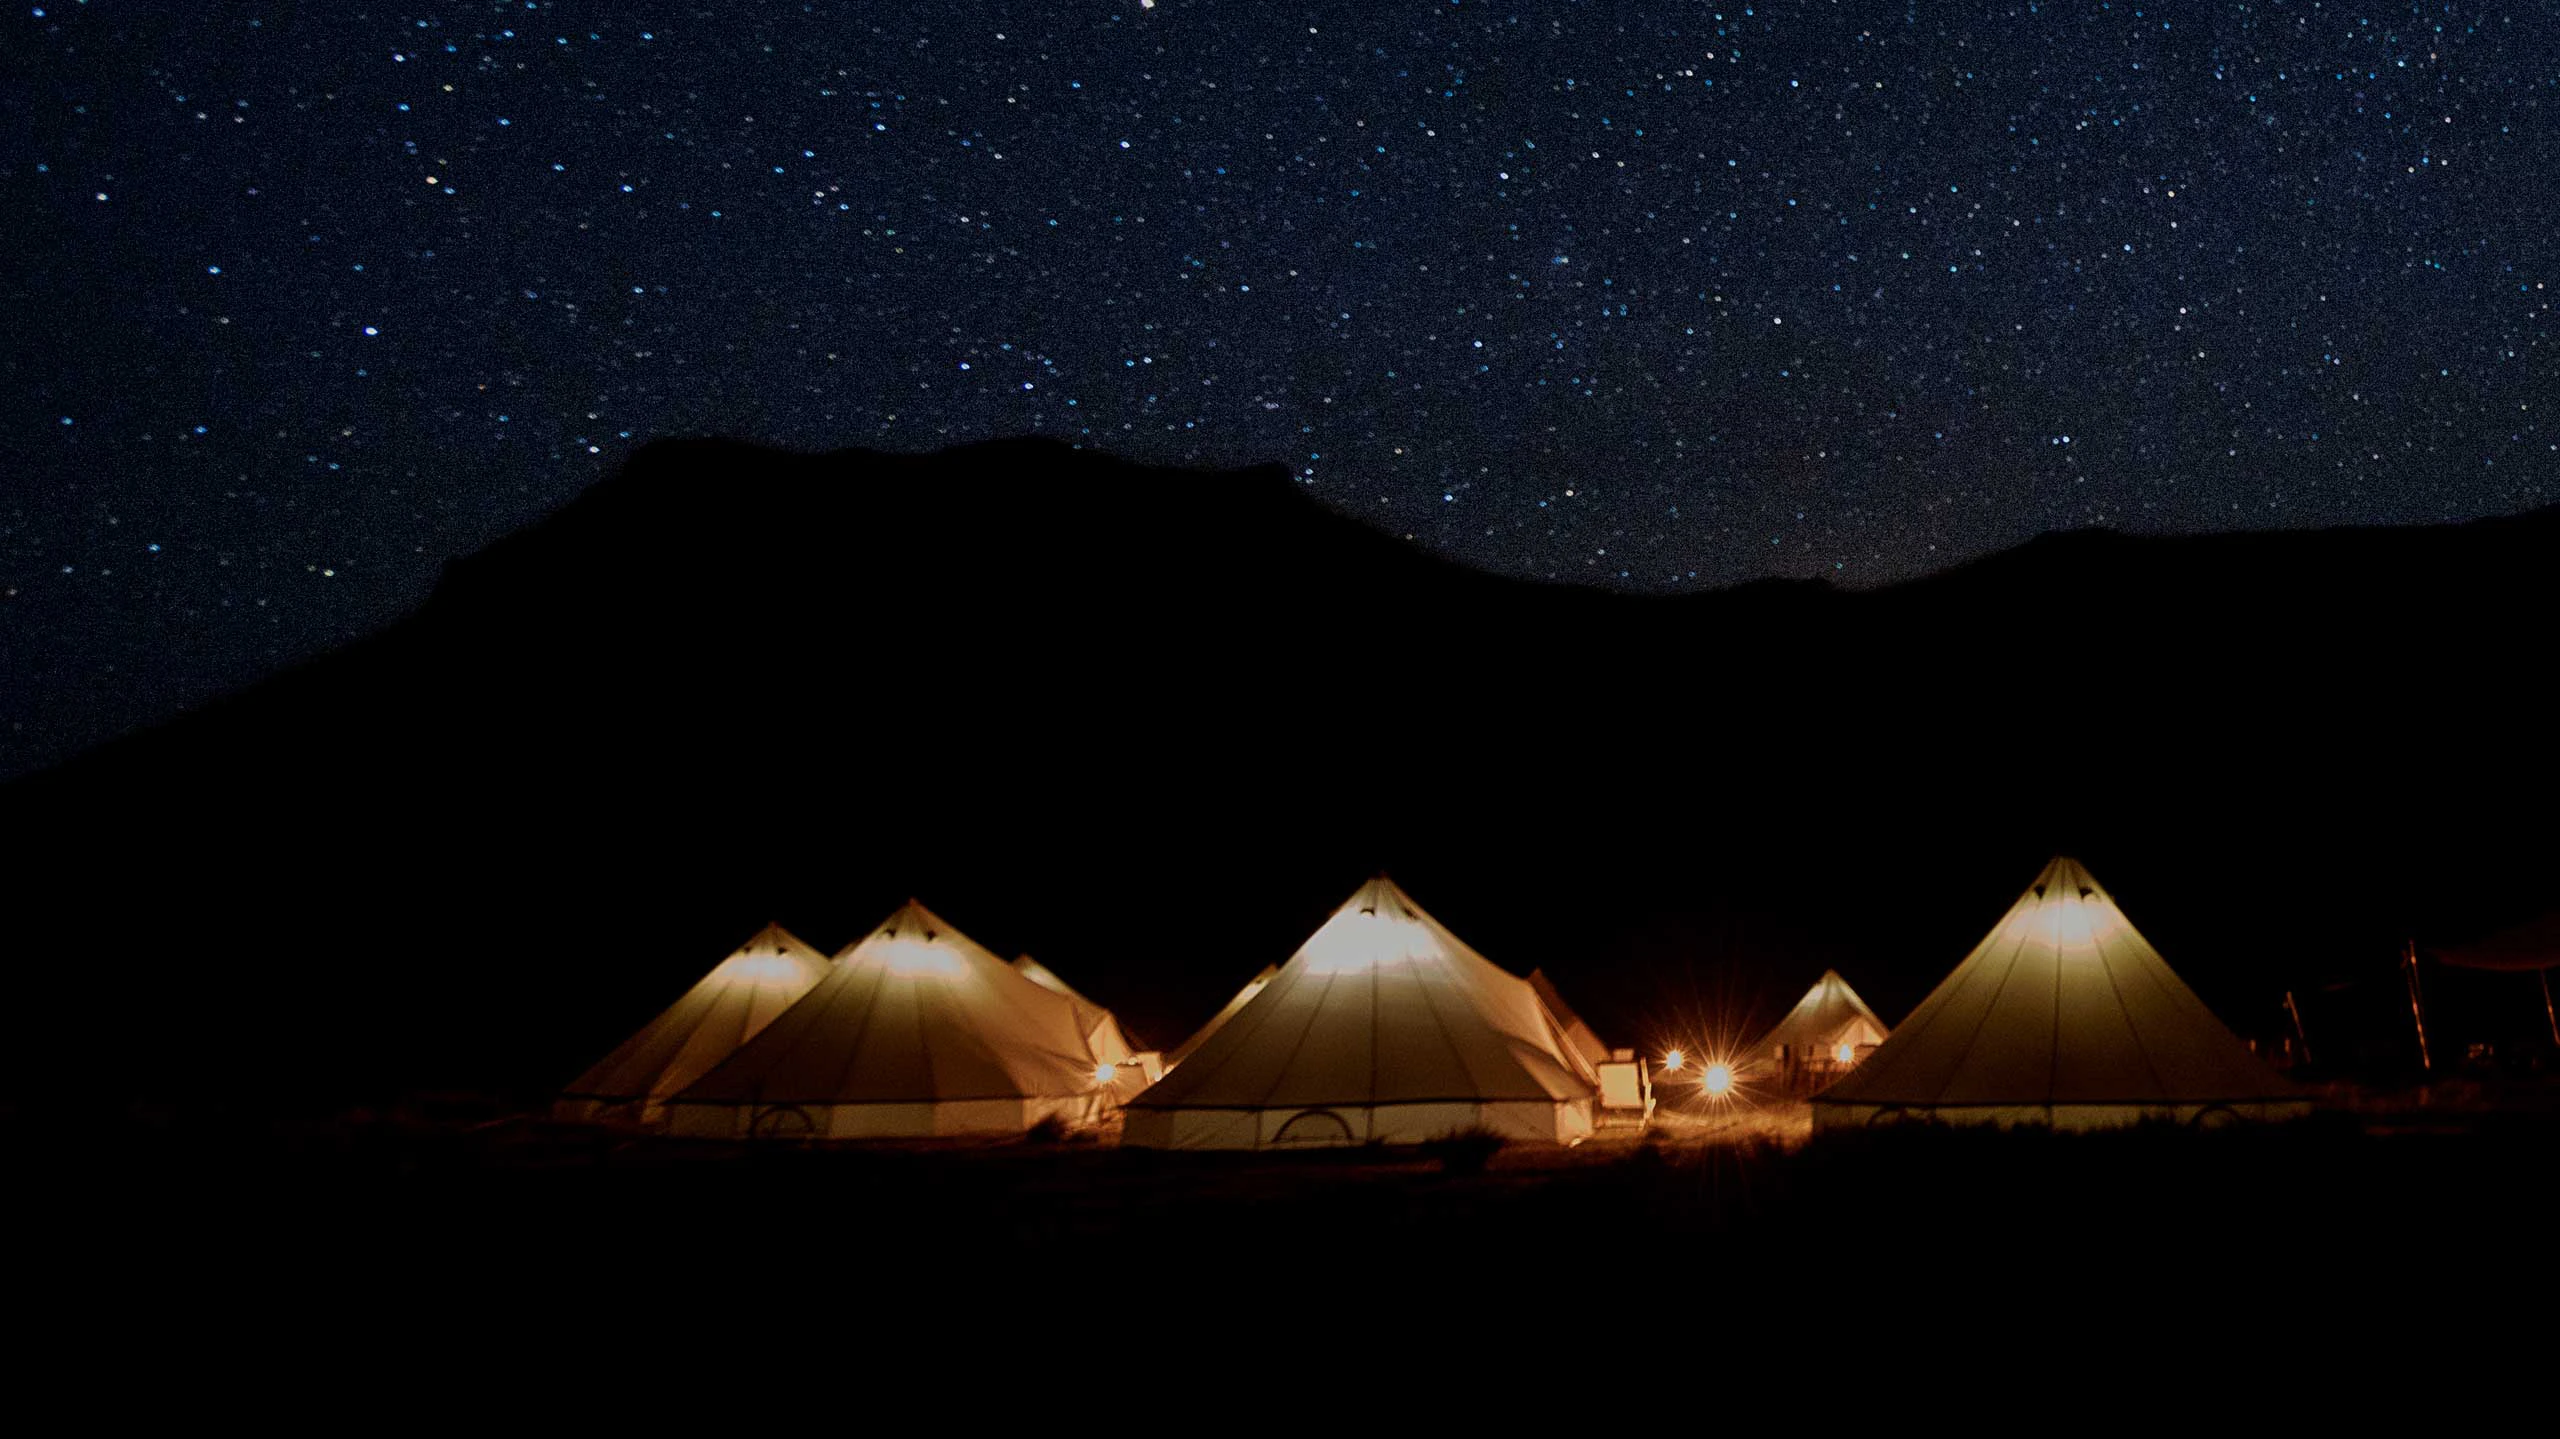 Nomadic glamping in bell tents in Argentina